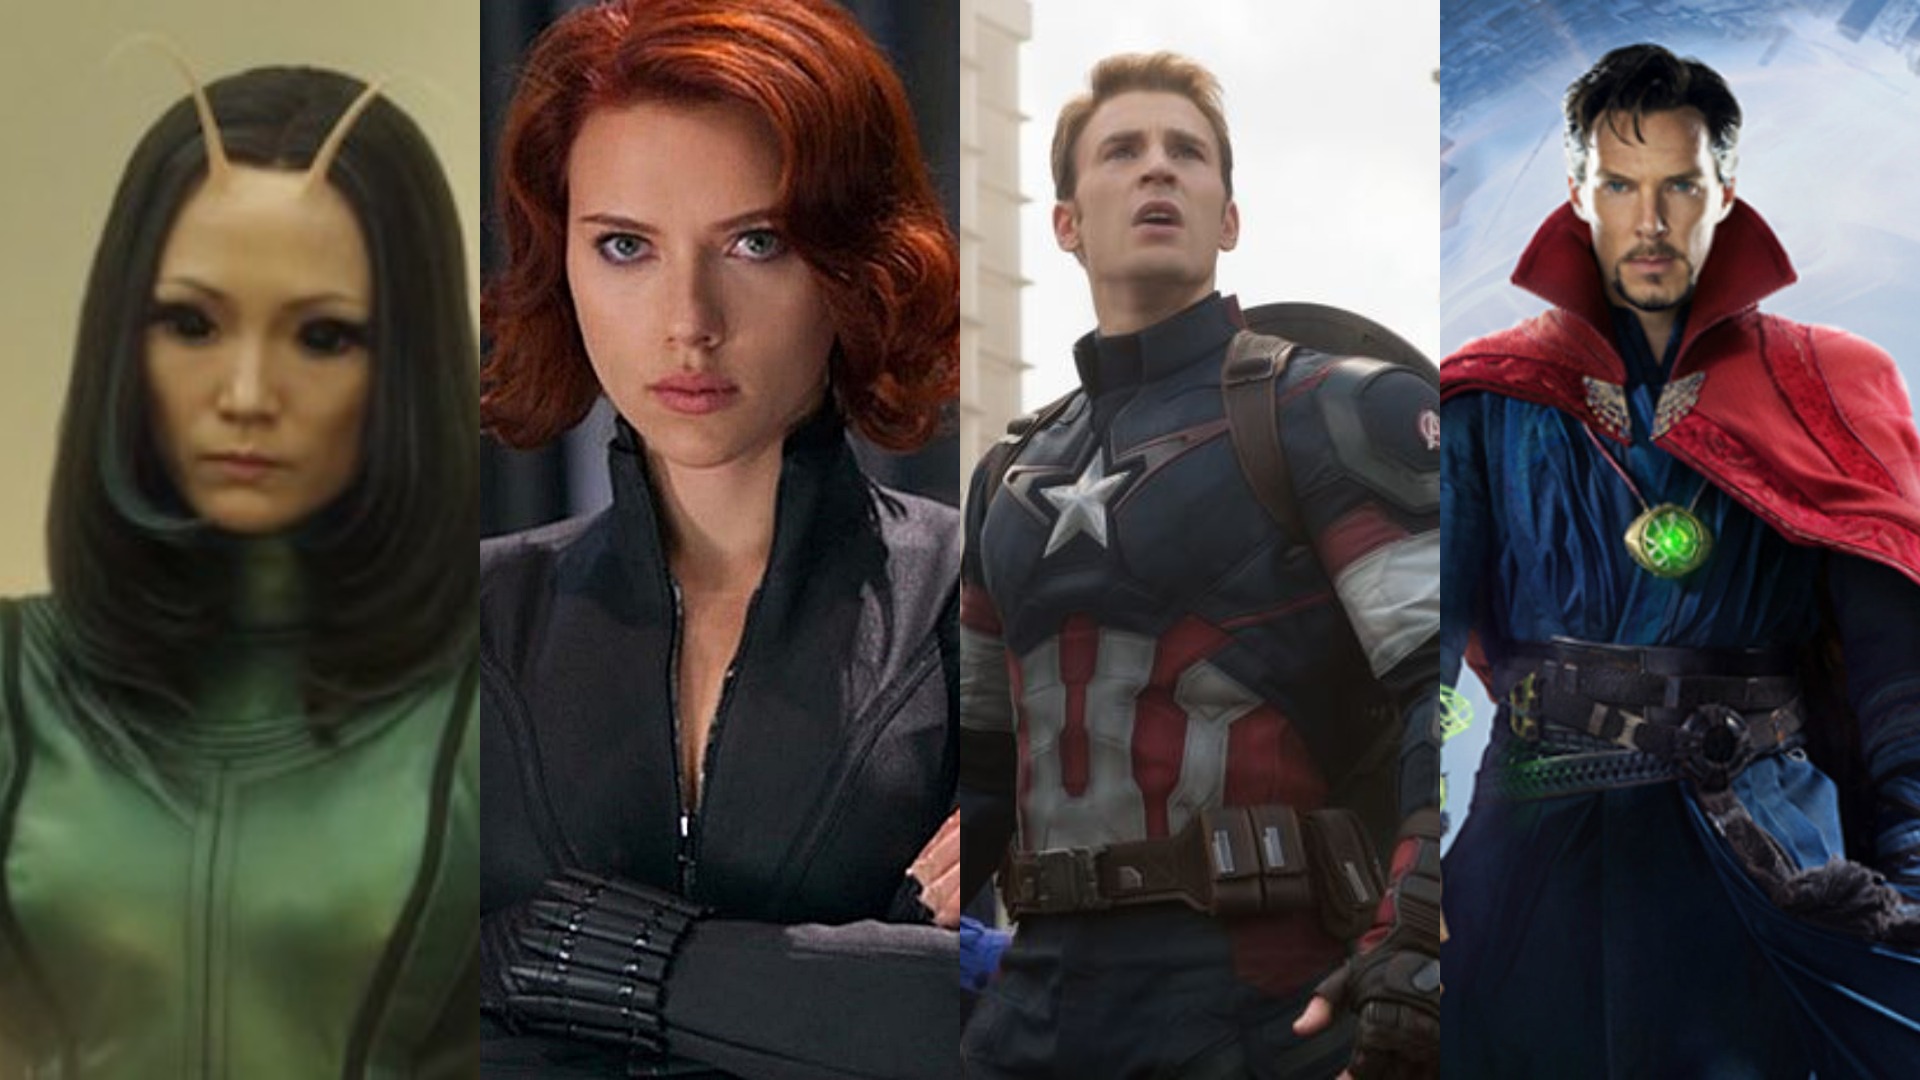 Only a Real Marvel Fan Can Match These Characters With Their Superpowers pjimage 191